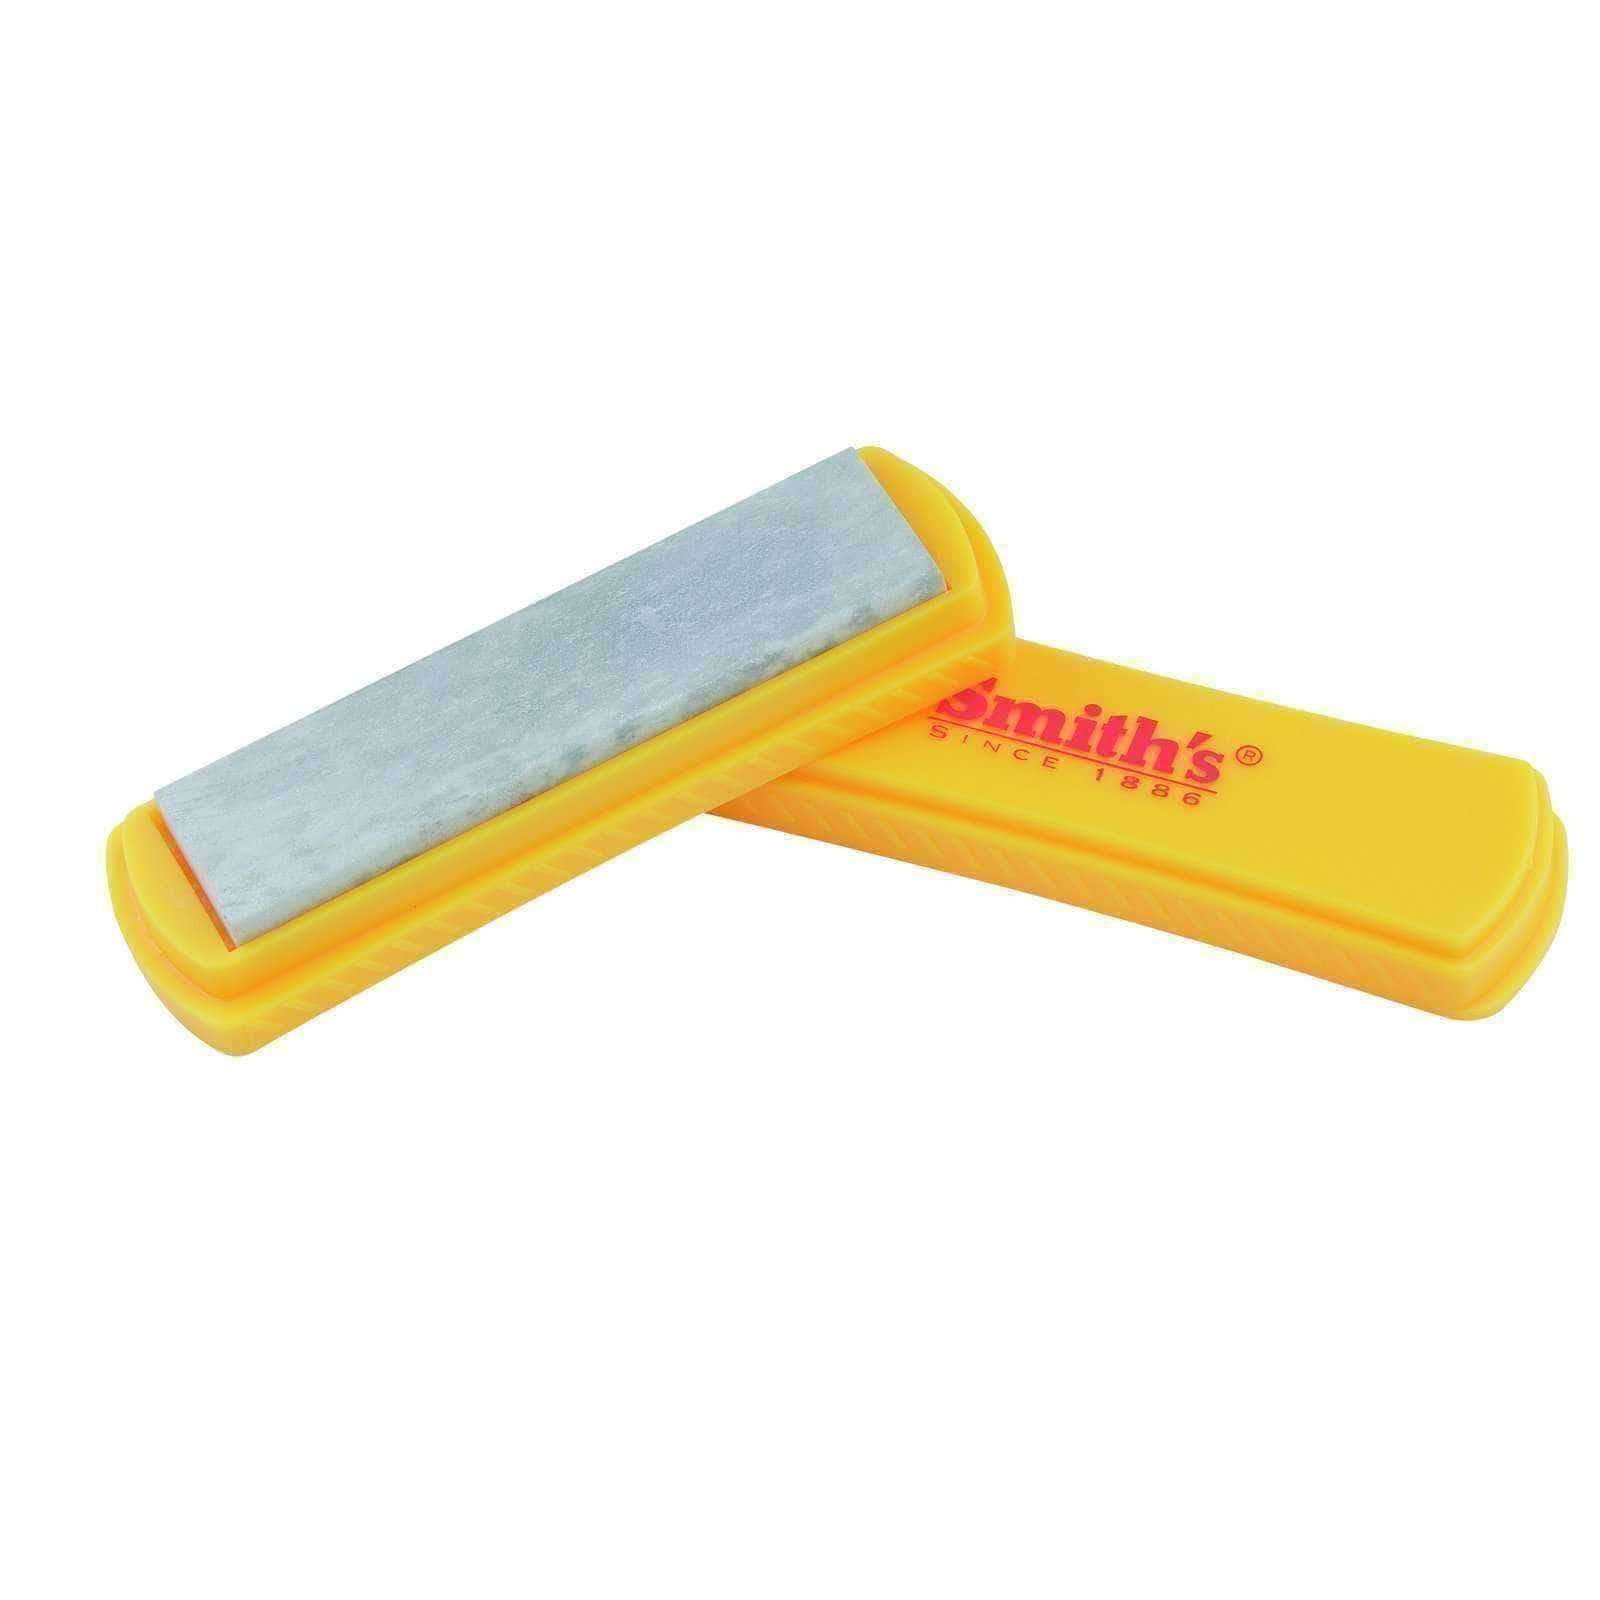 Smith's, Smith's 4" Natural Arkansas Sharpening Stone, Sharpening, Wylies Outdoor World,